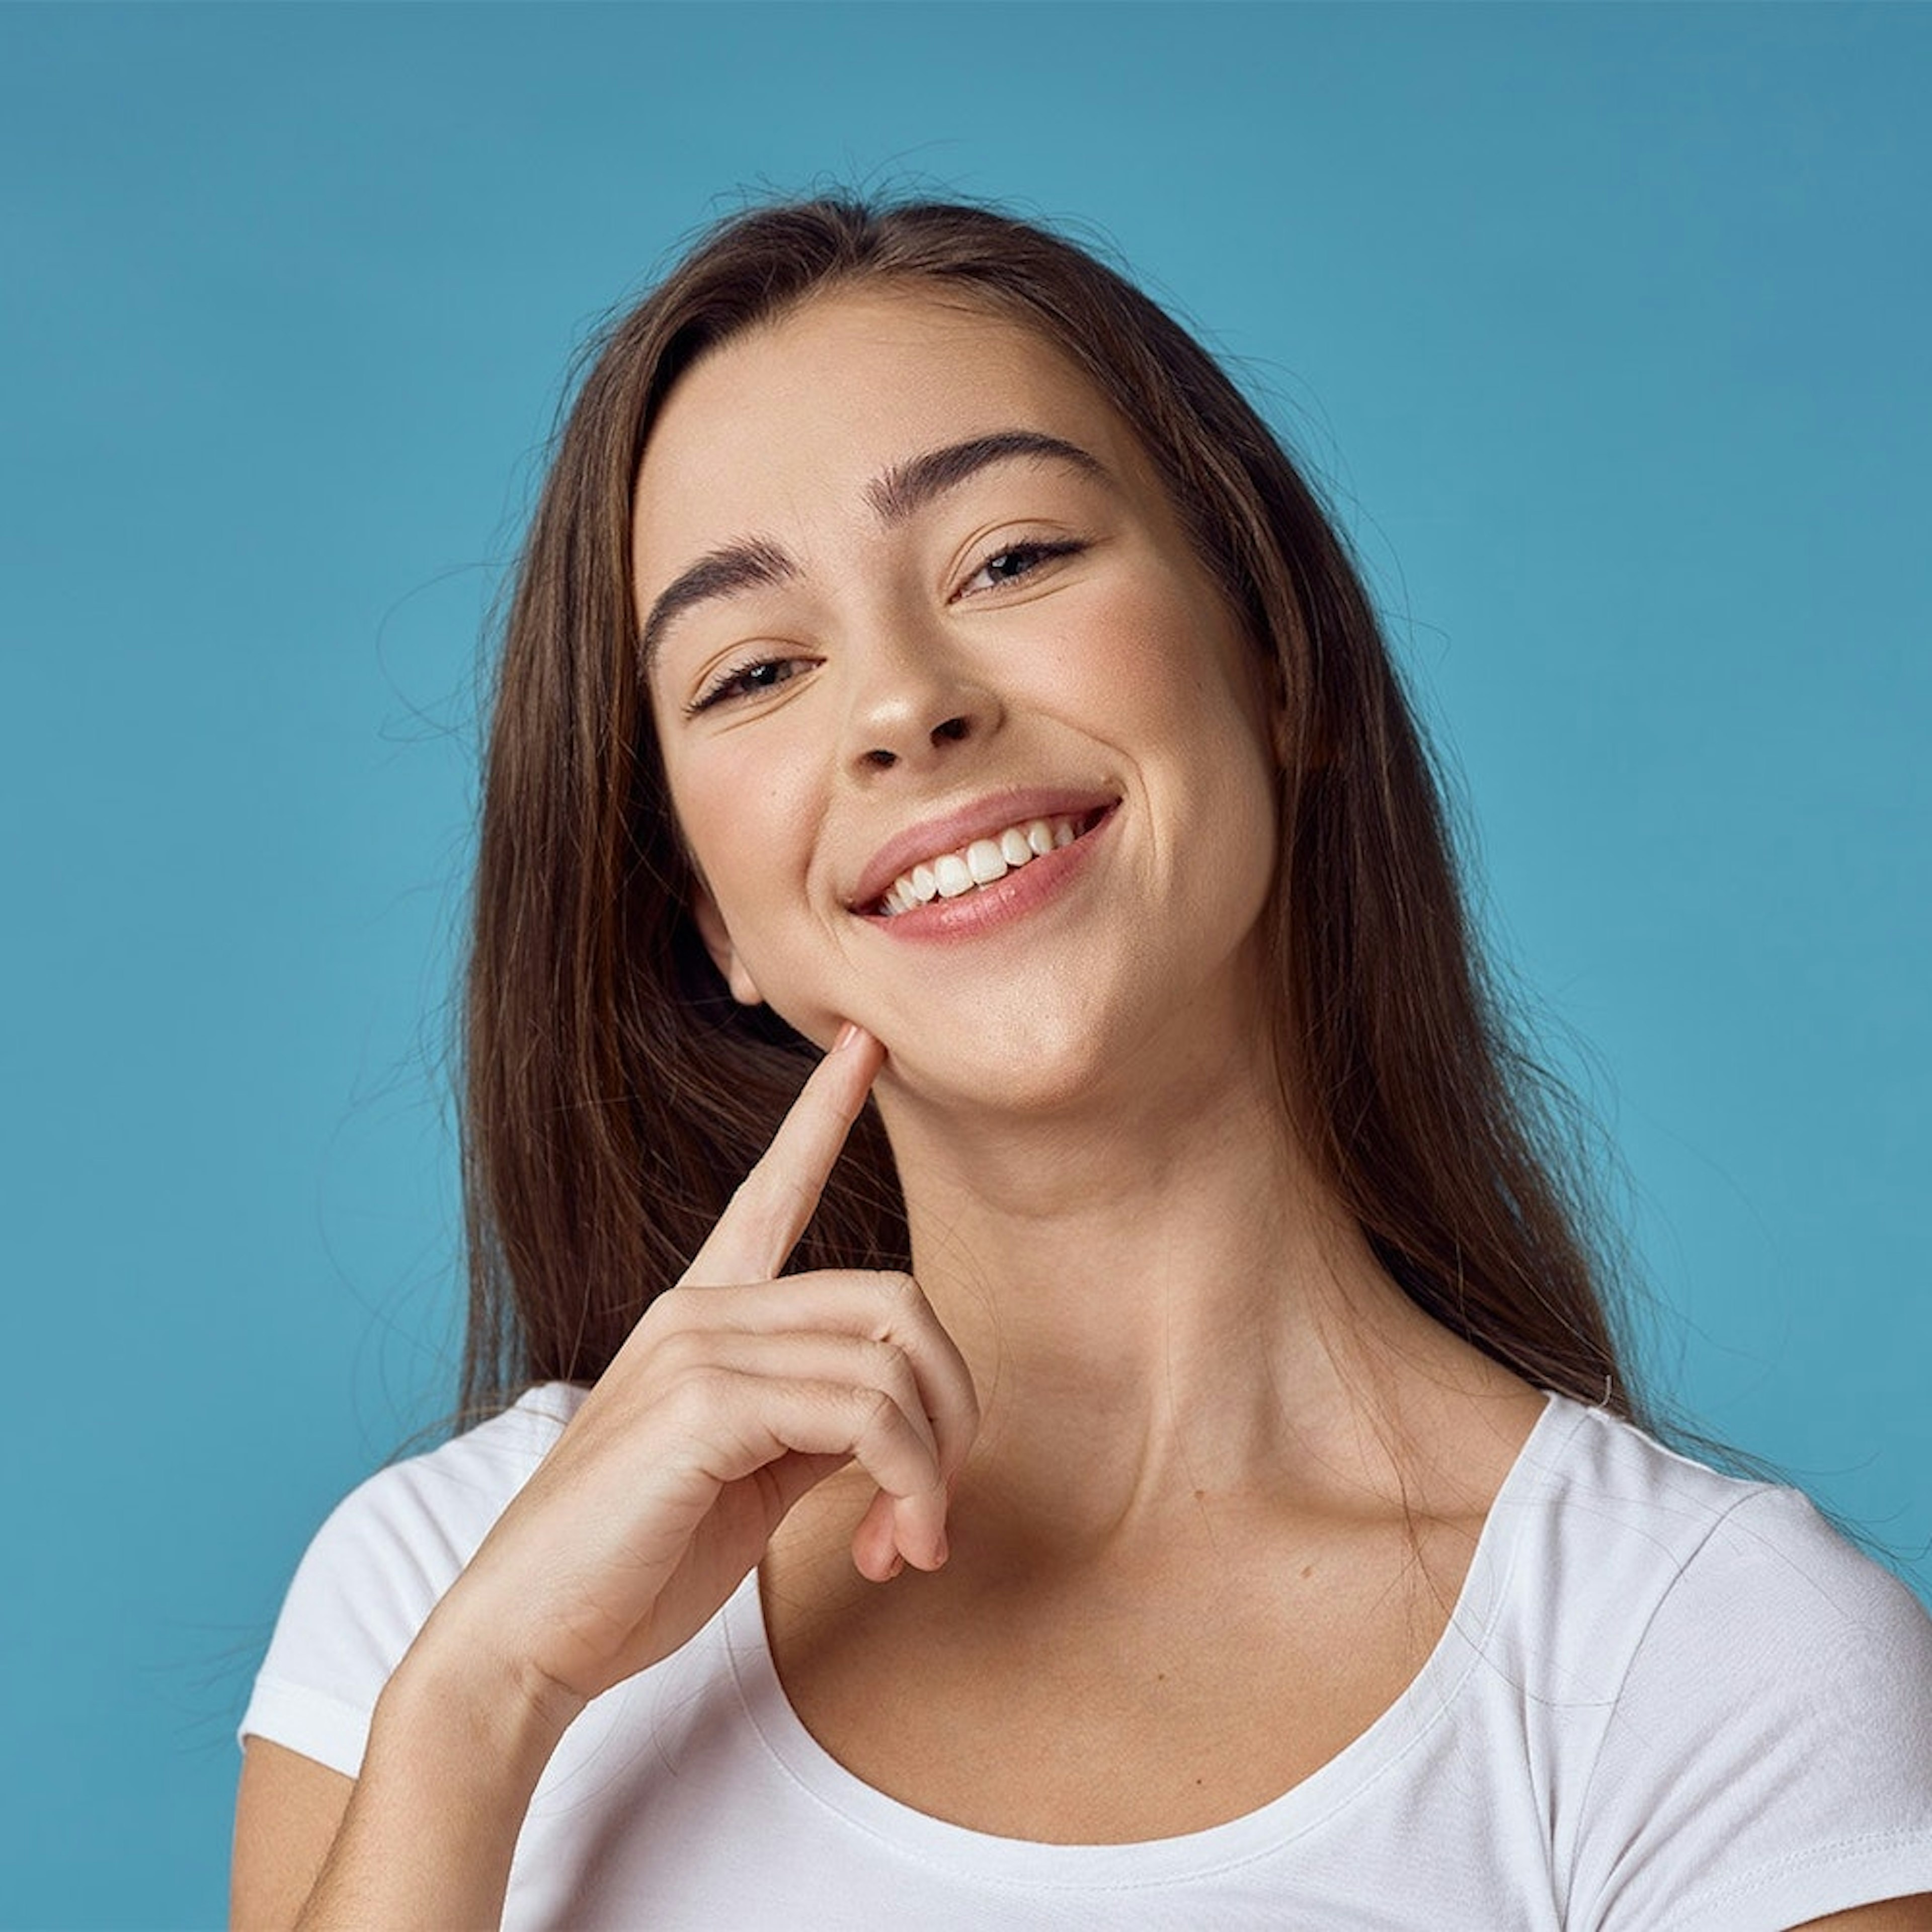 Smiling teenage girl pointing to mouth after wisdom tooth removal